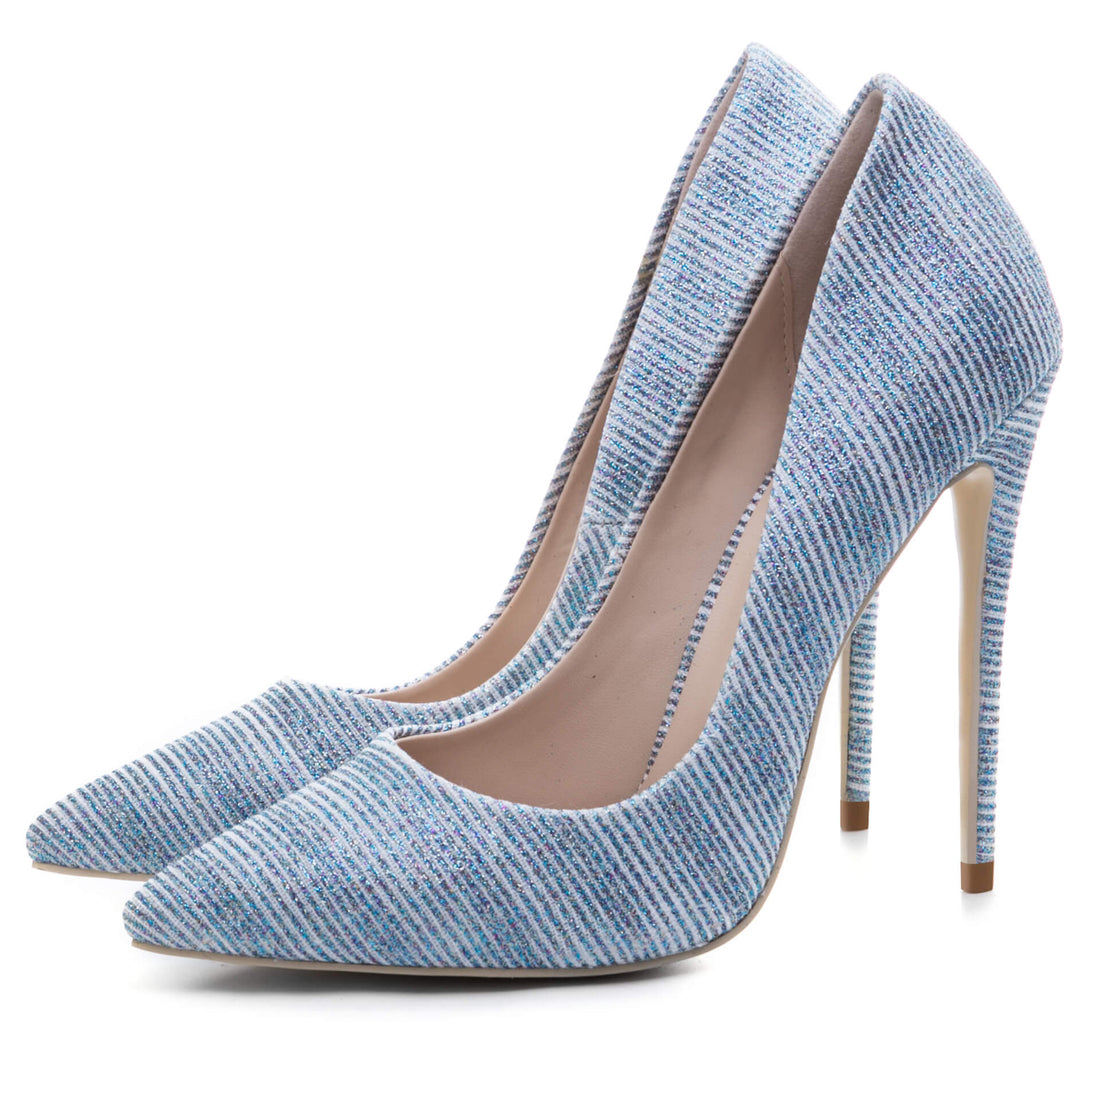 Casual Sequin Fabric Pointed Toe Stiletto Heel Pumps